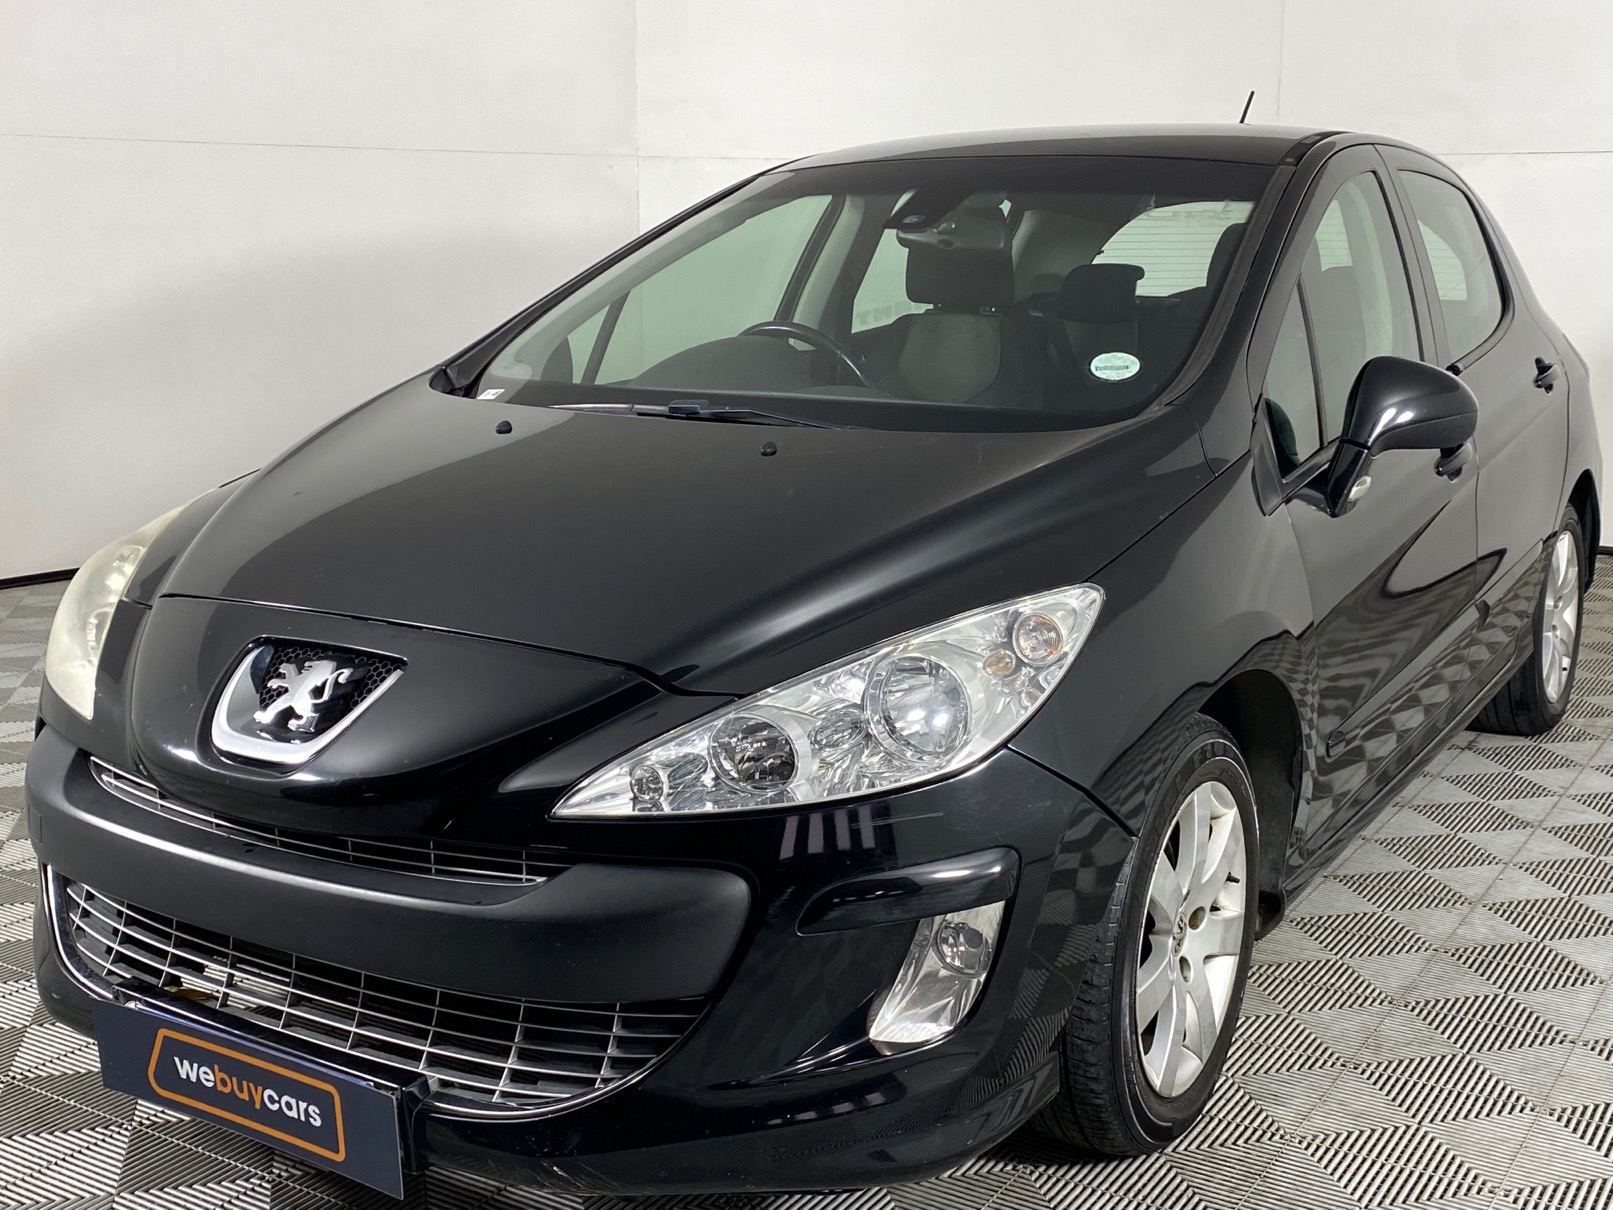 Used 12 Peugeot 308 2 0 Hdi Premium Pack Active For Sale Webuycars